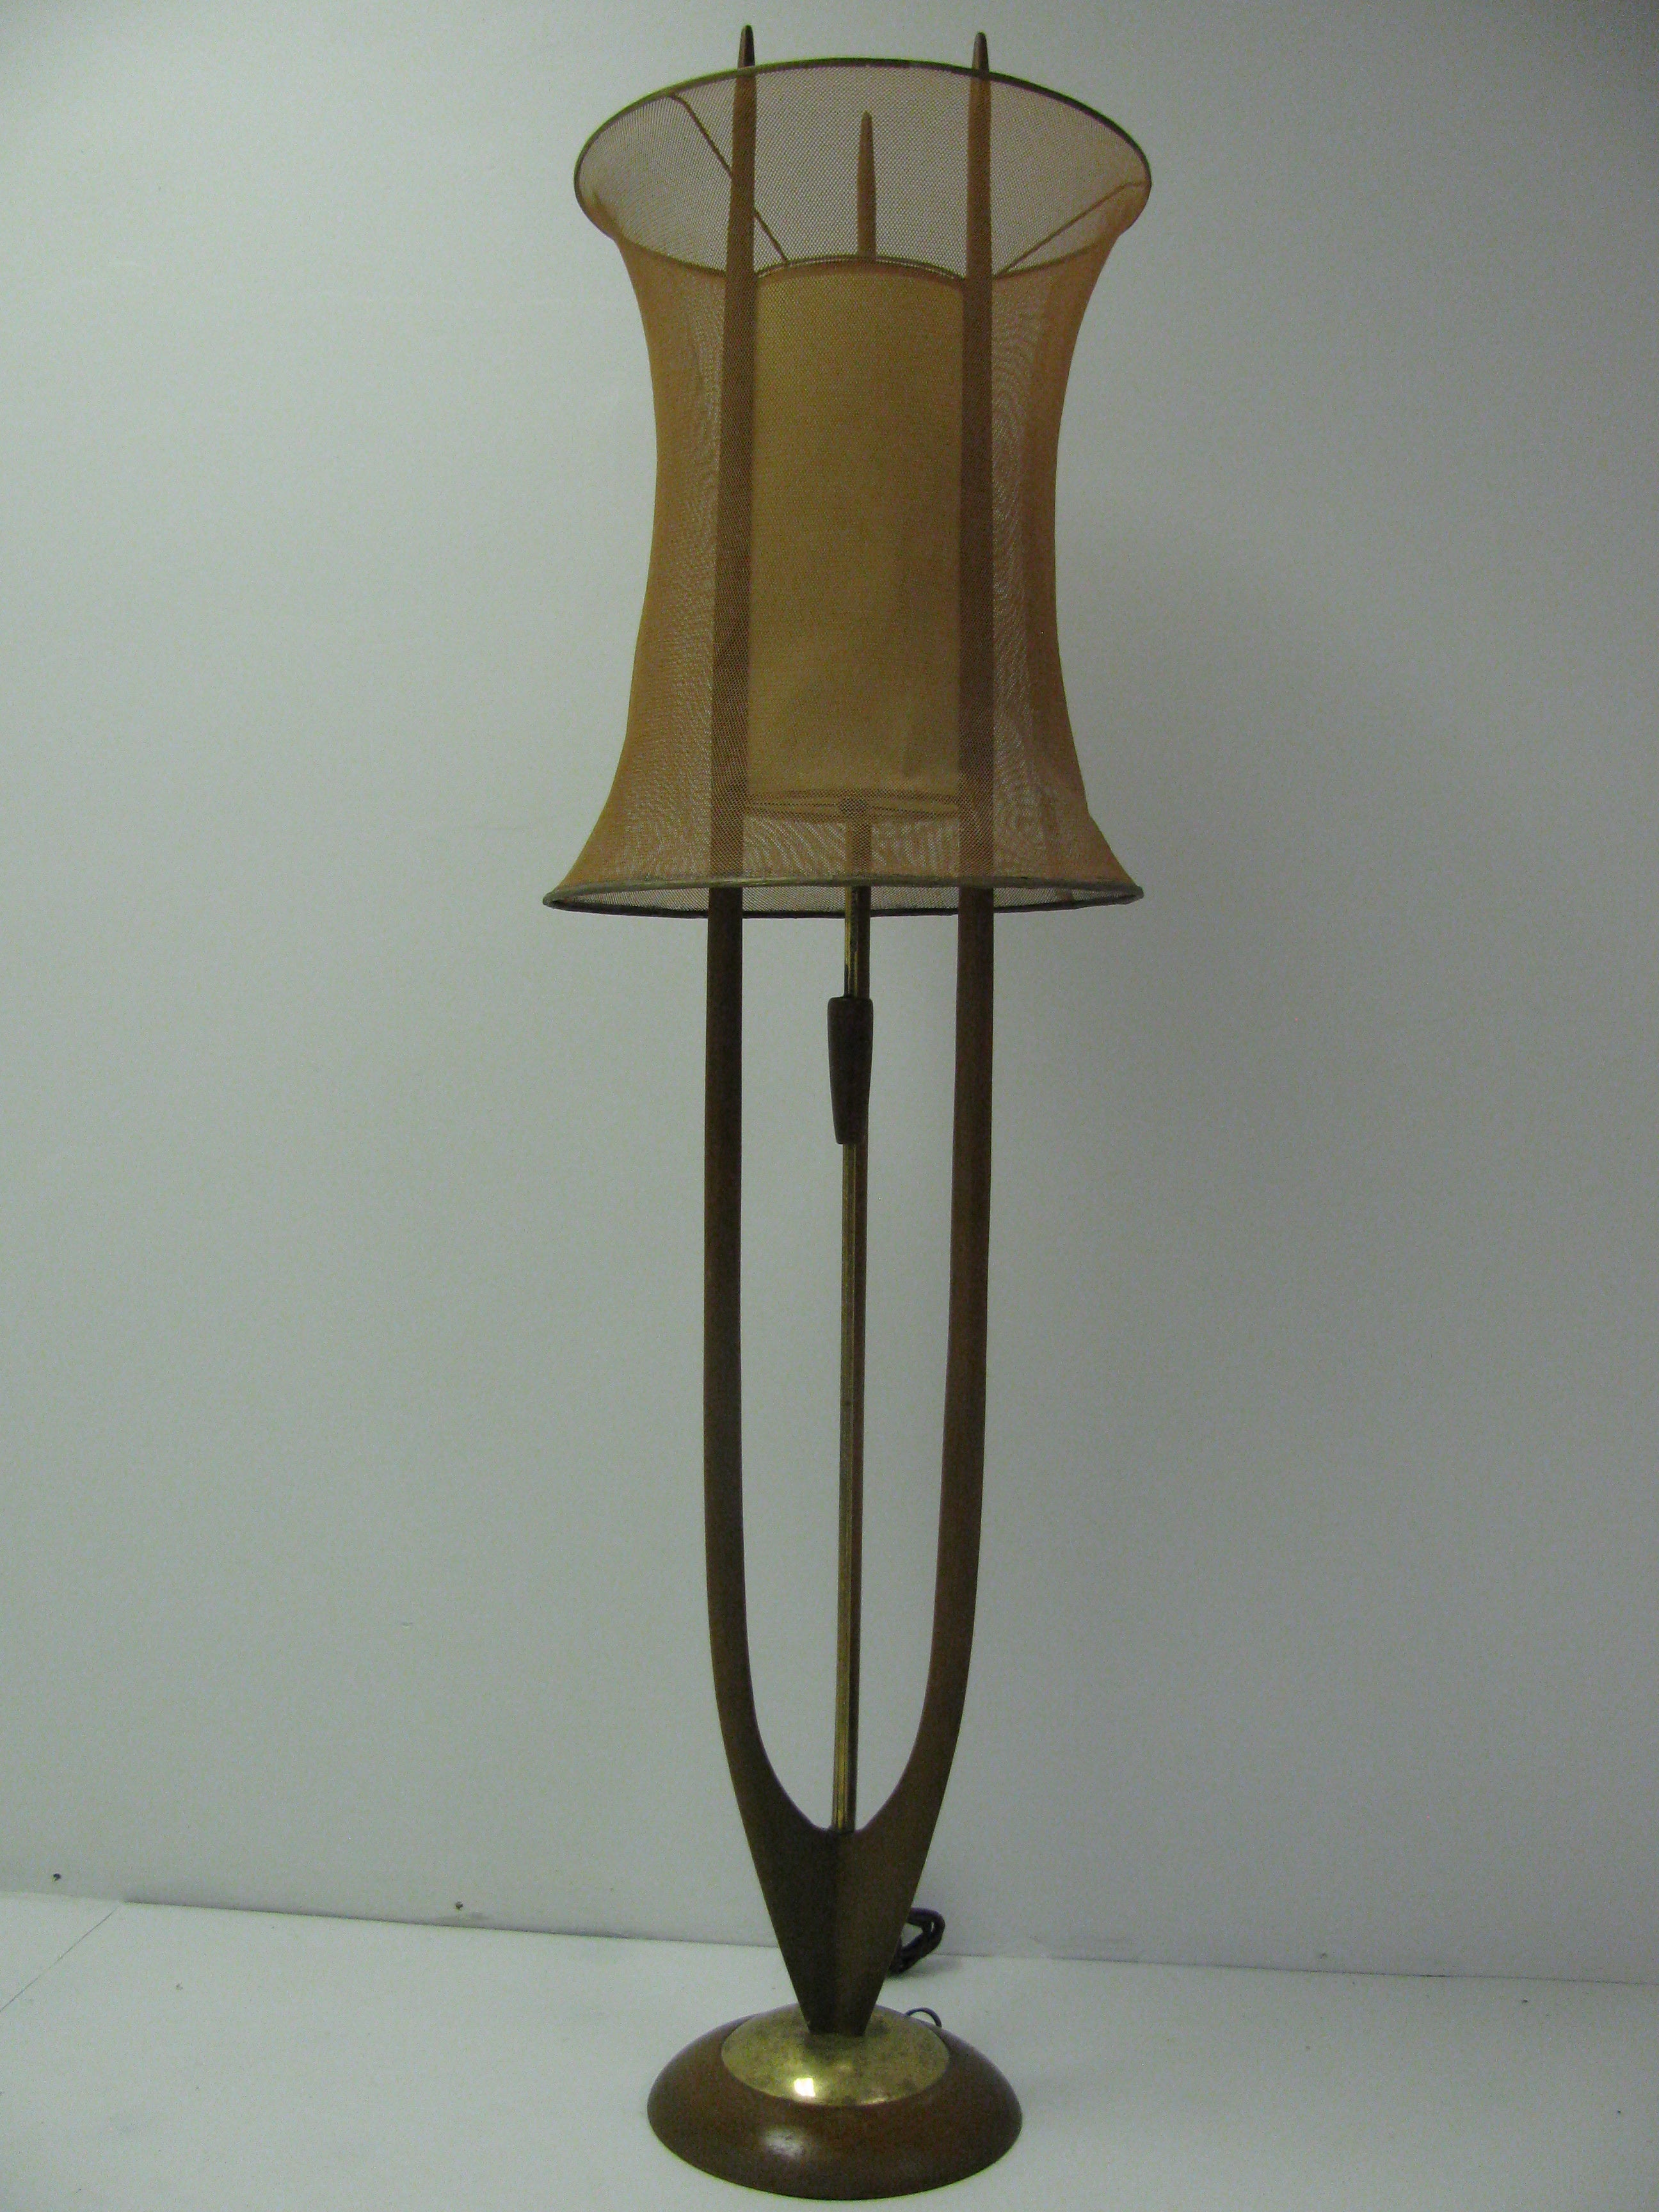 Lamp has been polished and rewired since photos were taken. Very interesting and unique floor lamp with copper mesh shade. Paper shade sits between walnut triple spire. Walnut handle on brass center rod is the on/off switch. Table lamps pictured are